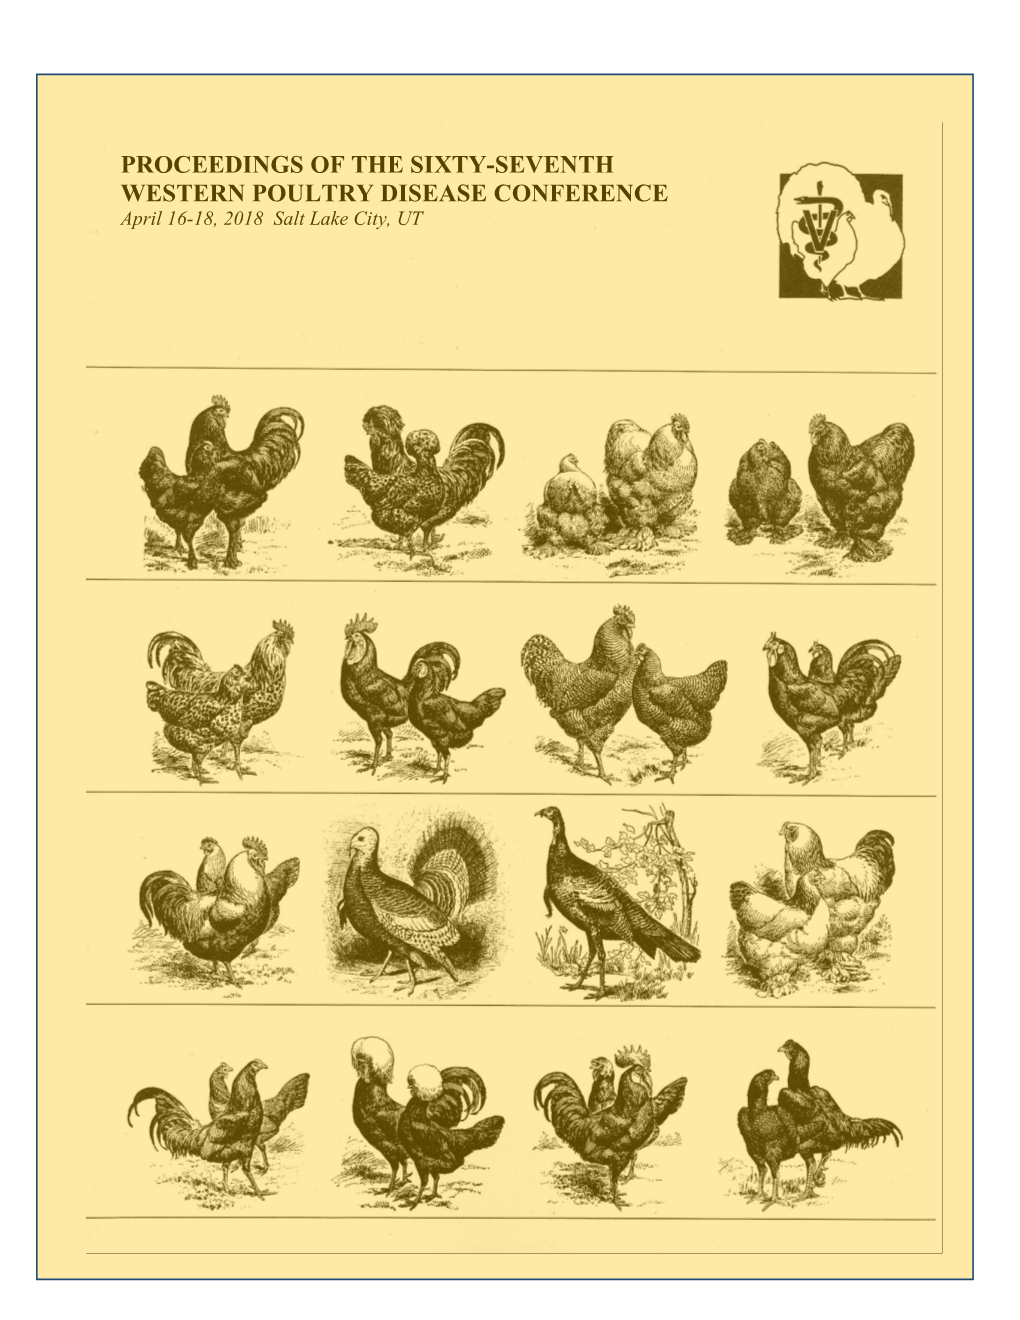 PROCEEDINGS of the SIXTY-SEVENTH WESTERN POULTRY DISEASE CONFERENCE April 16-18, 2018 Salt Lake City, UT